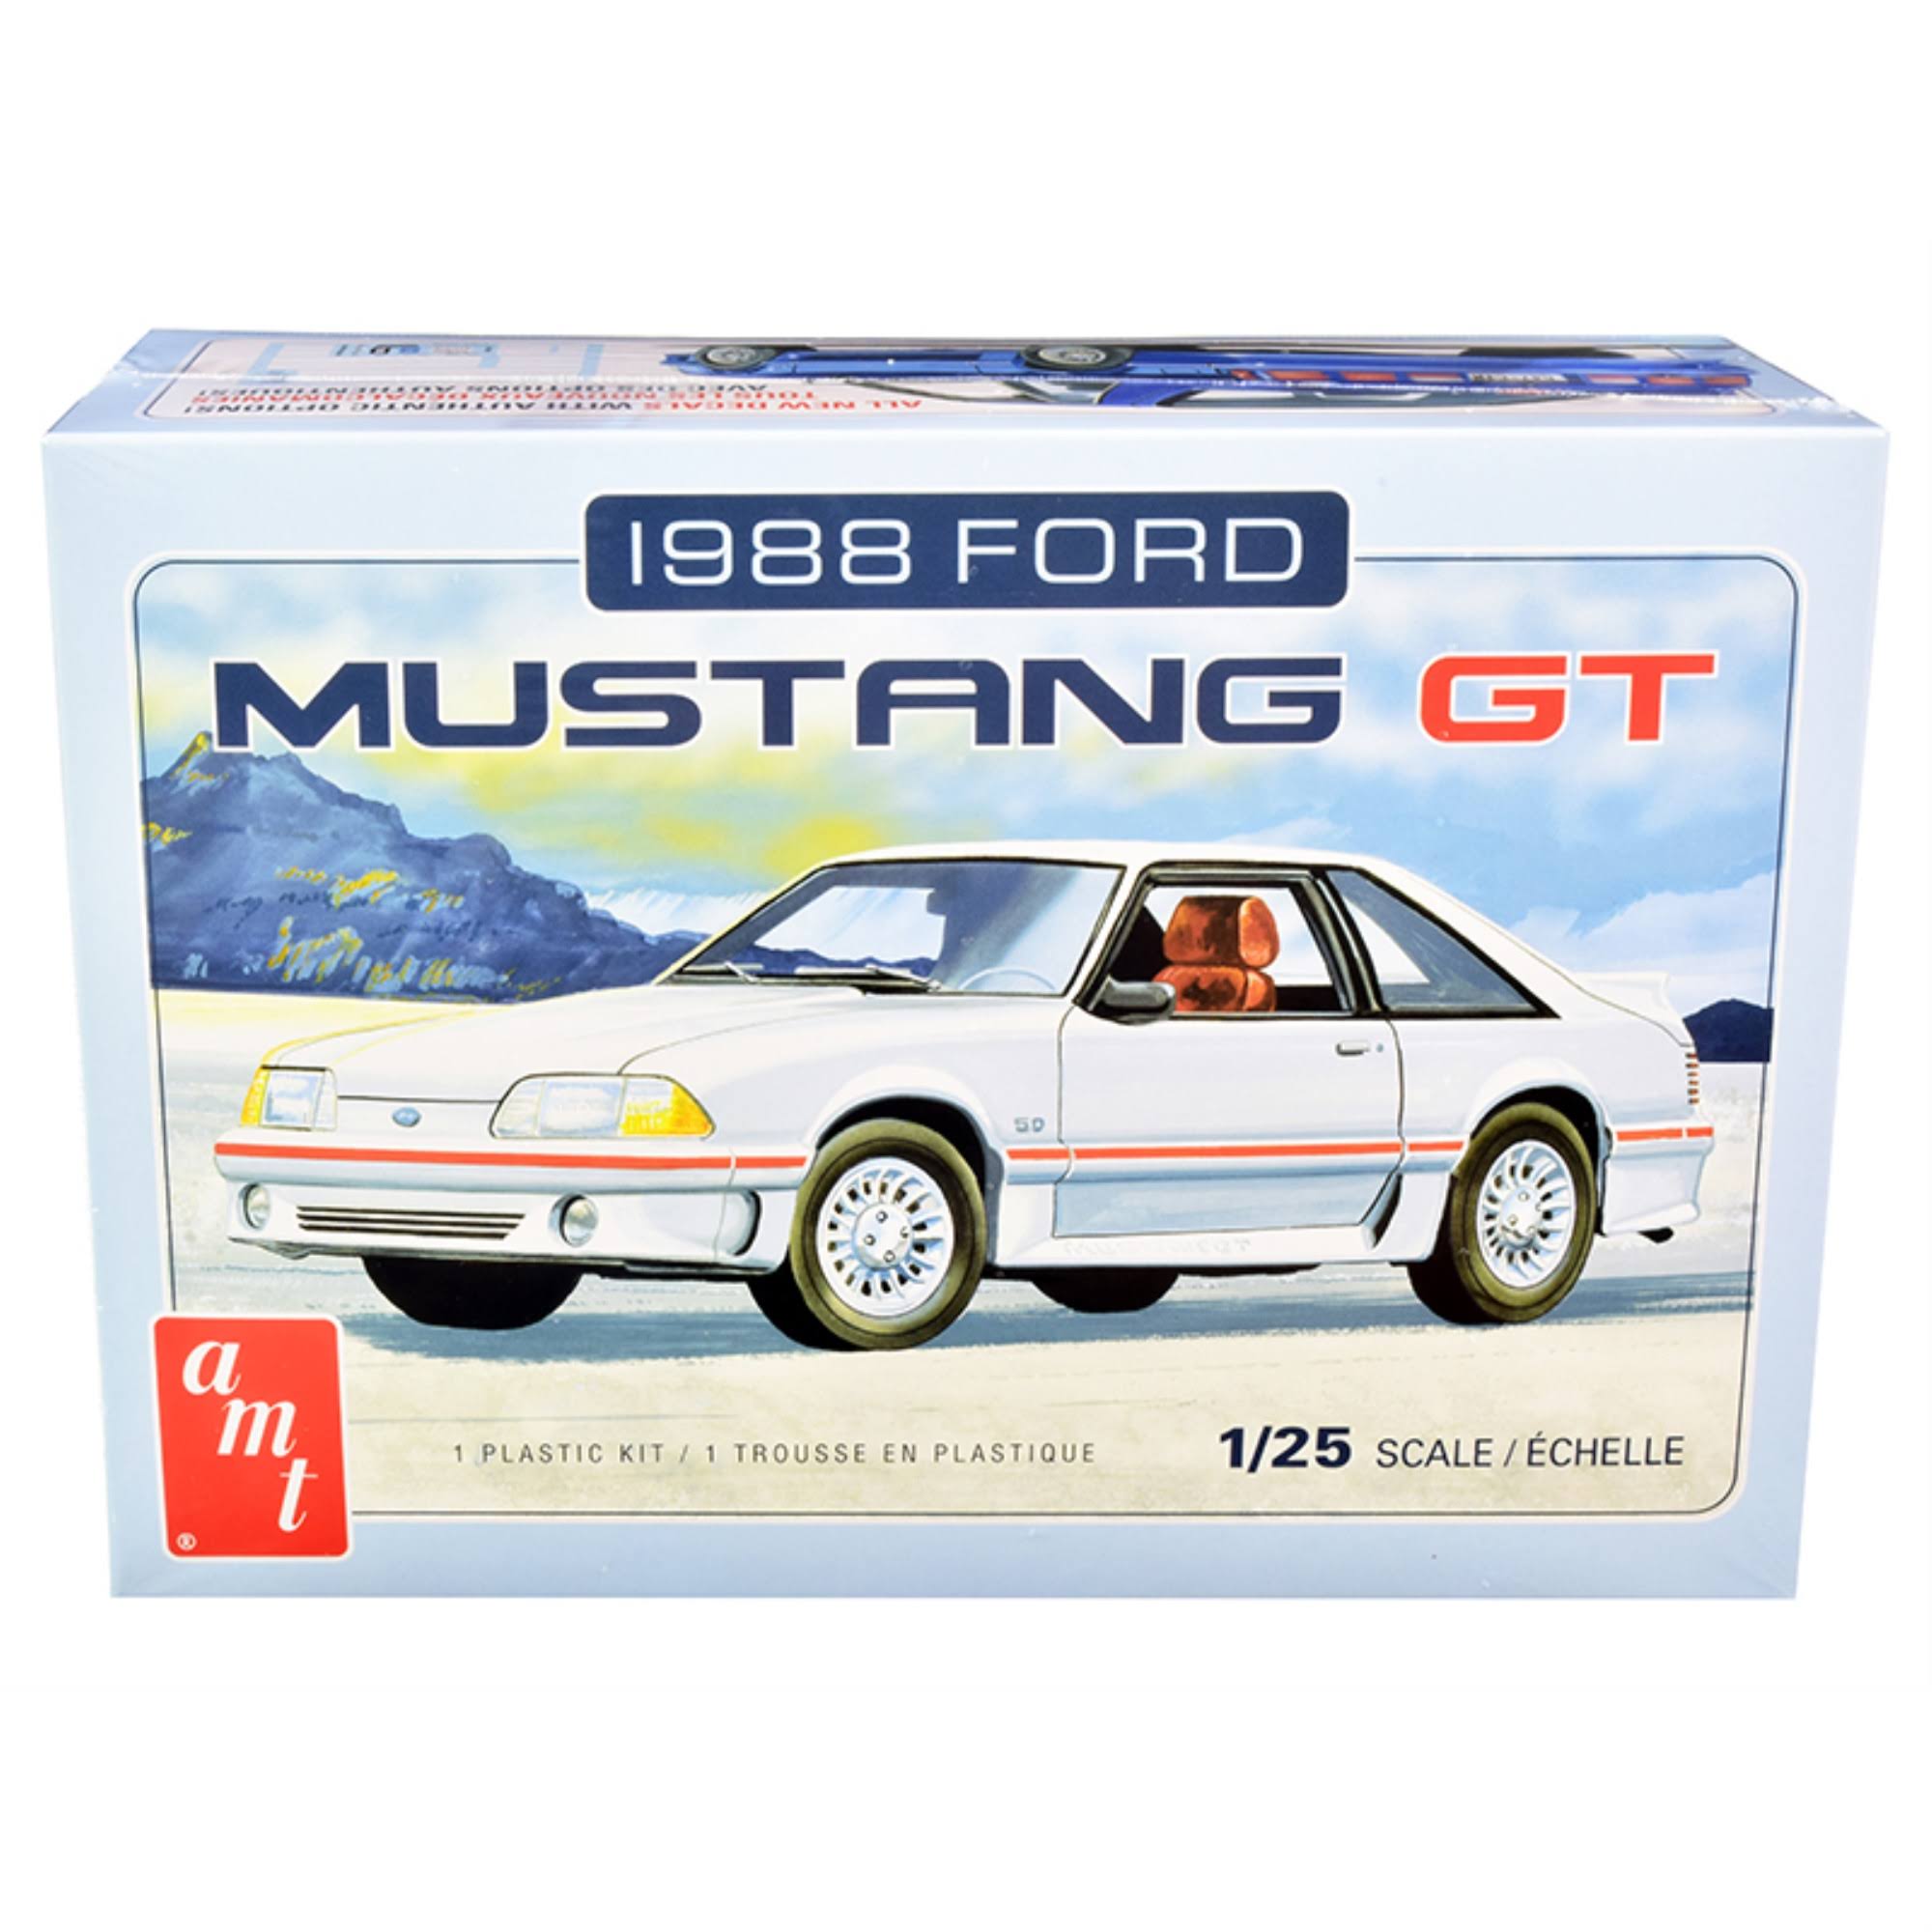 AMT/MPC 591216 - 1/25 1988 Ford Mustang - New